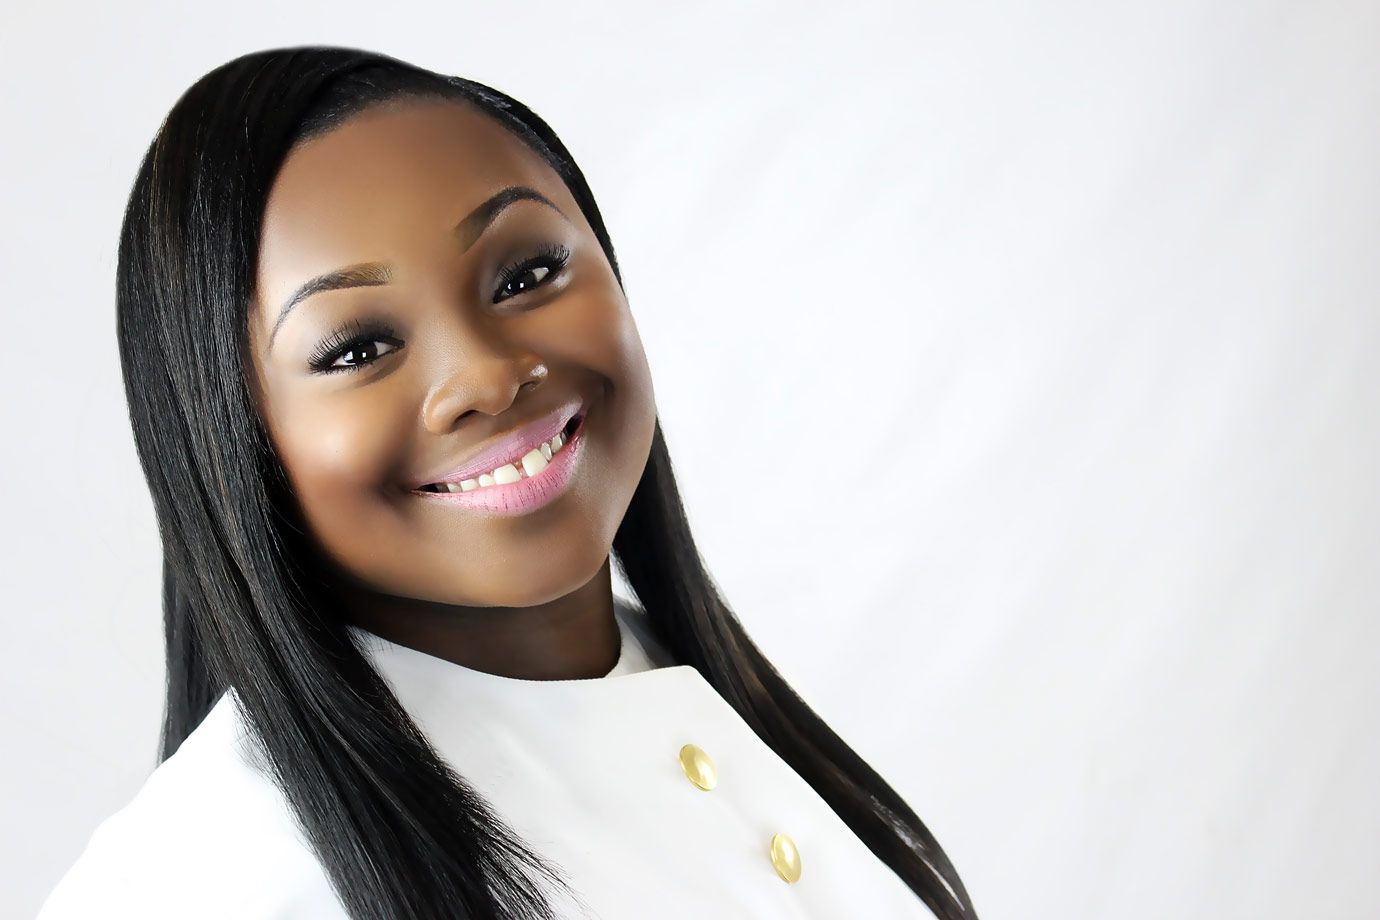 jekalyn carr greater is coming torrent